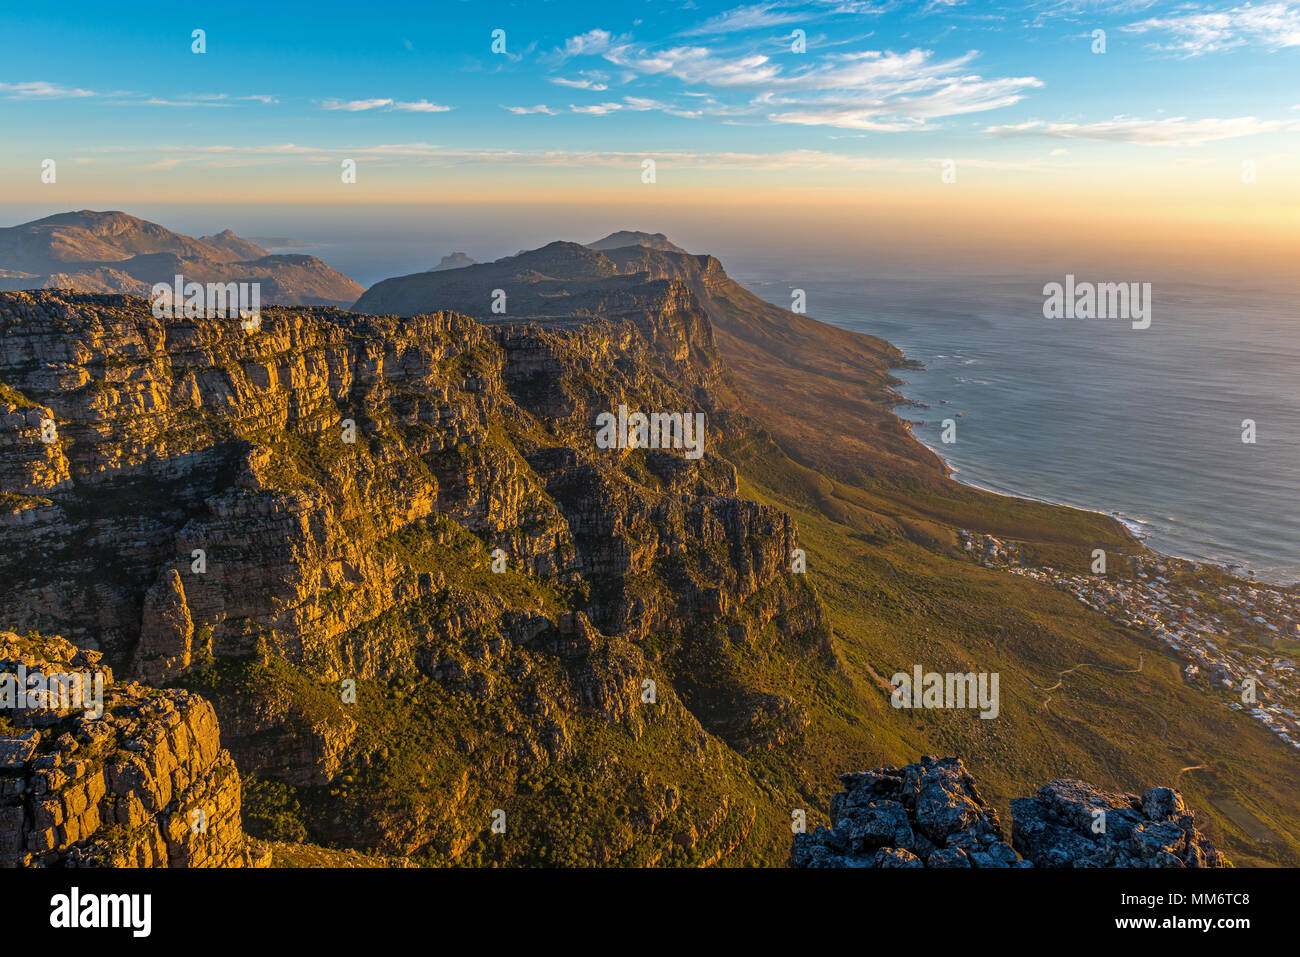 Sunset landscape of the Table Mountain national park with the city of Cape Town seen from above and the Atlantic Ocean in South Africa. Stock Photo